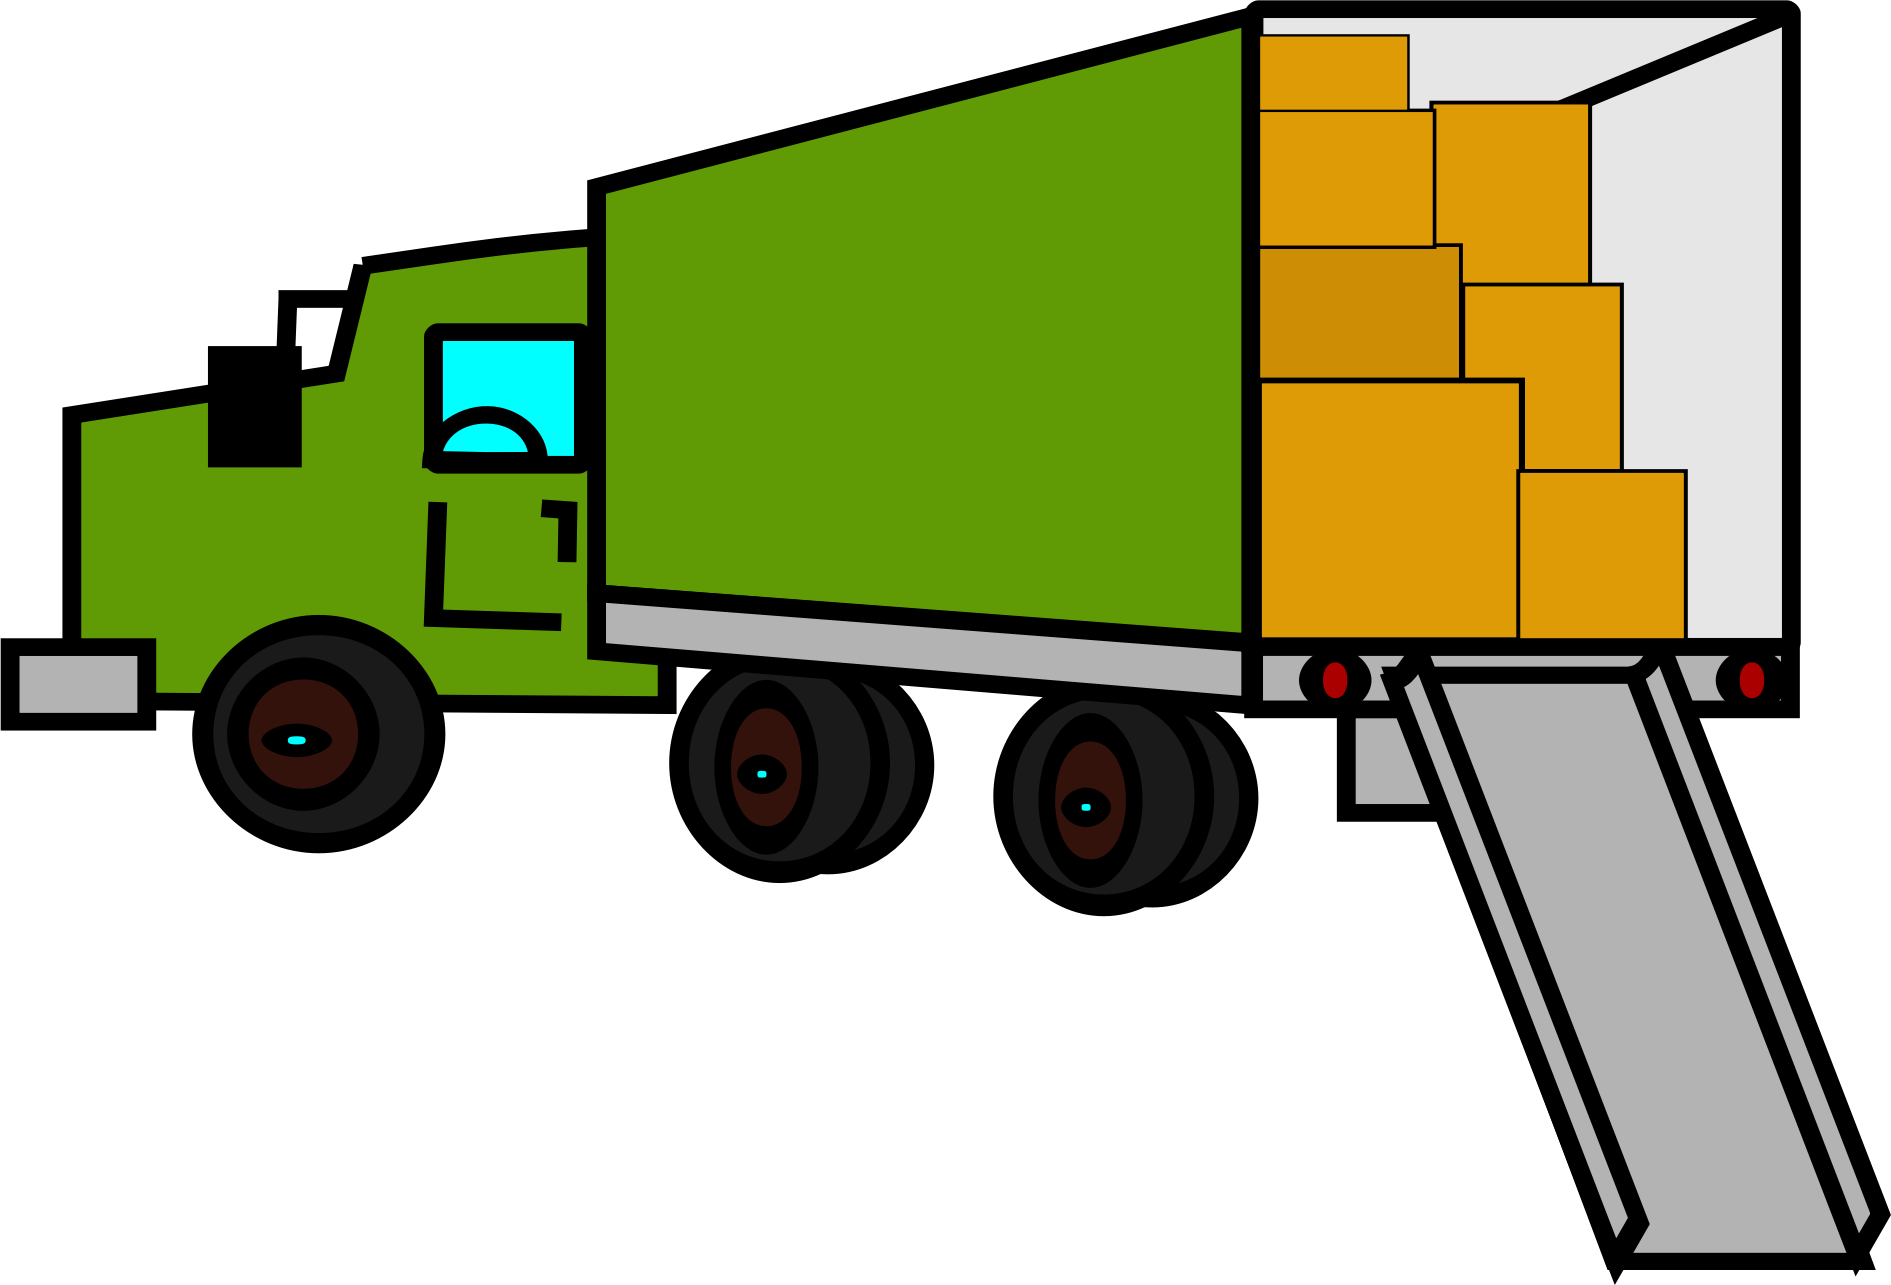 A Cartoon Of A Green Truck With Boxes In The Back